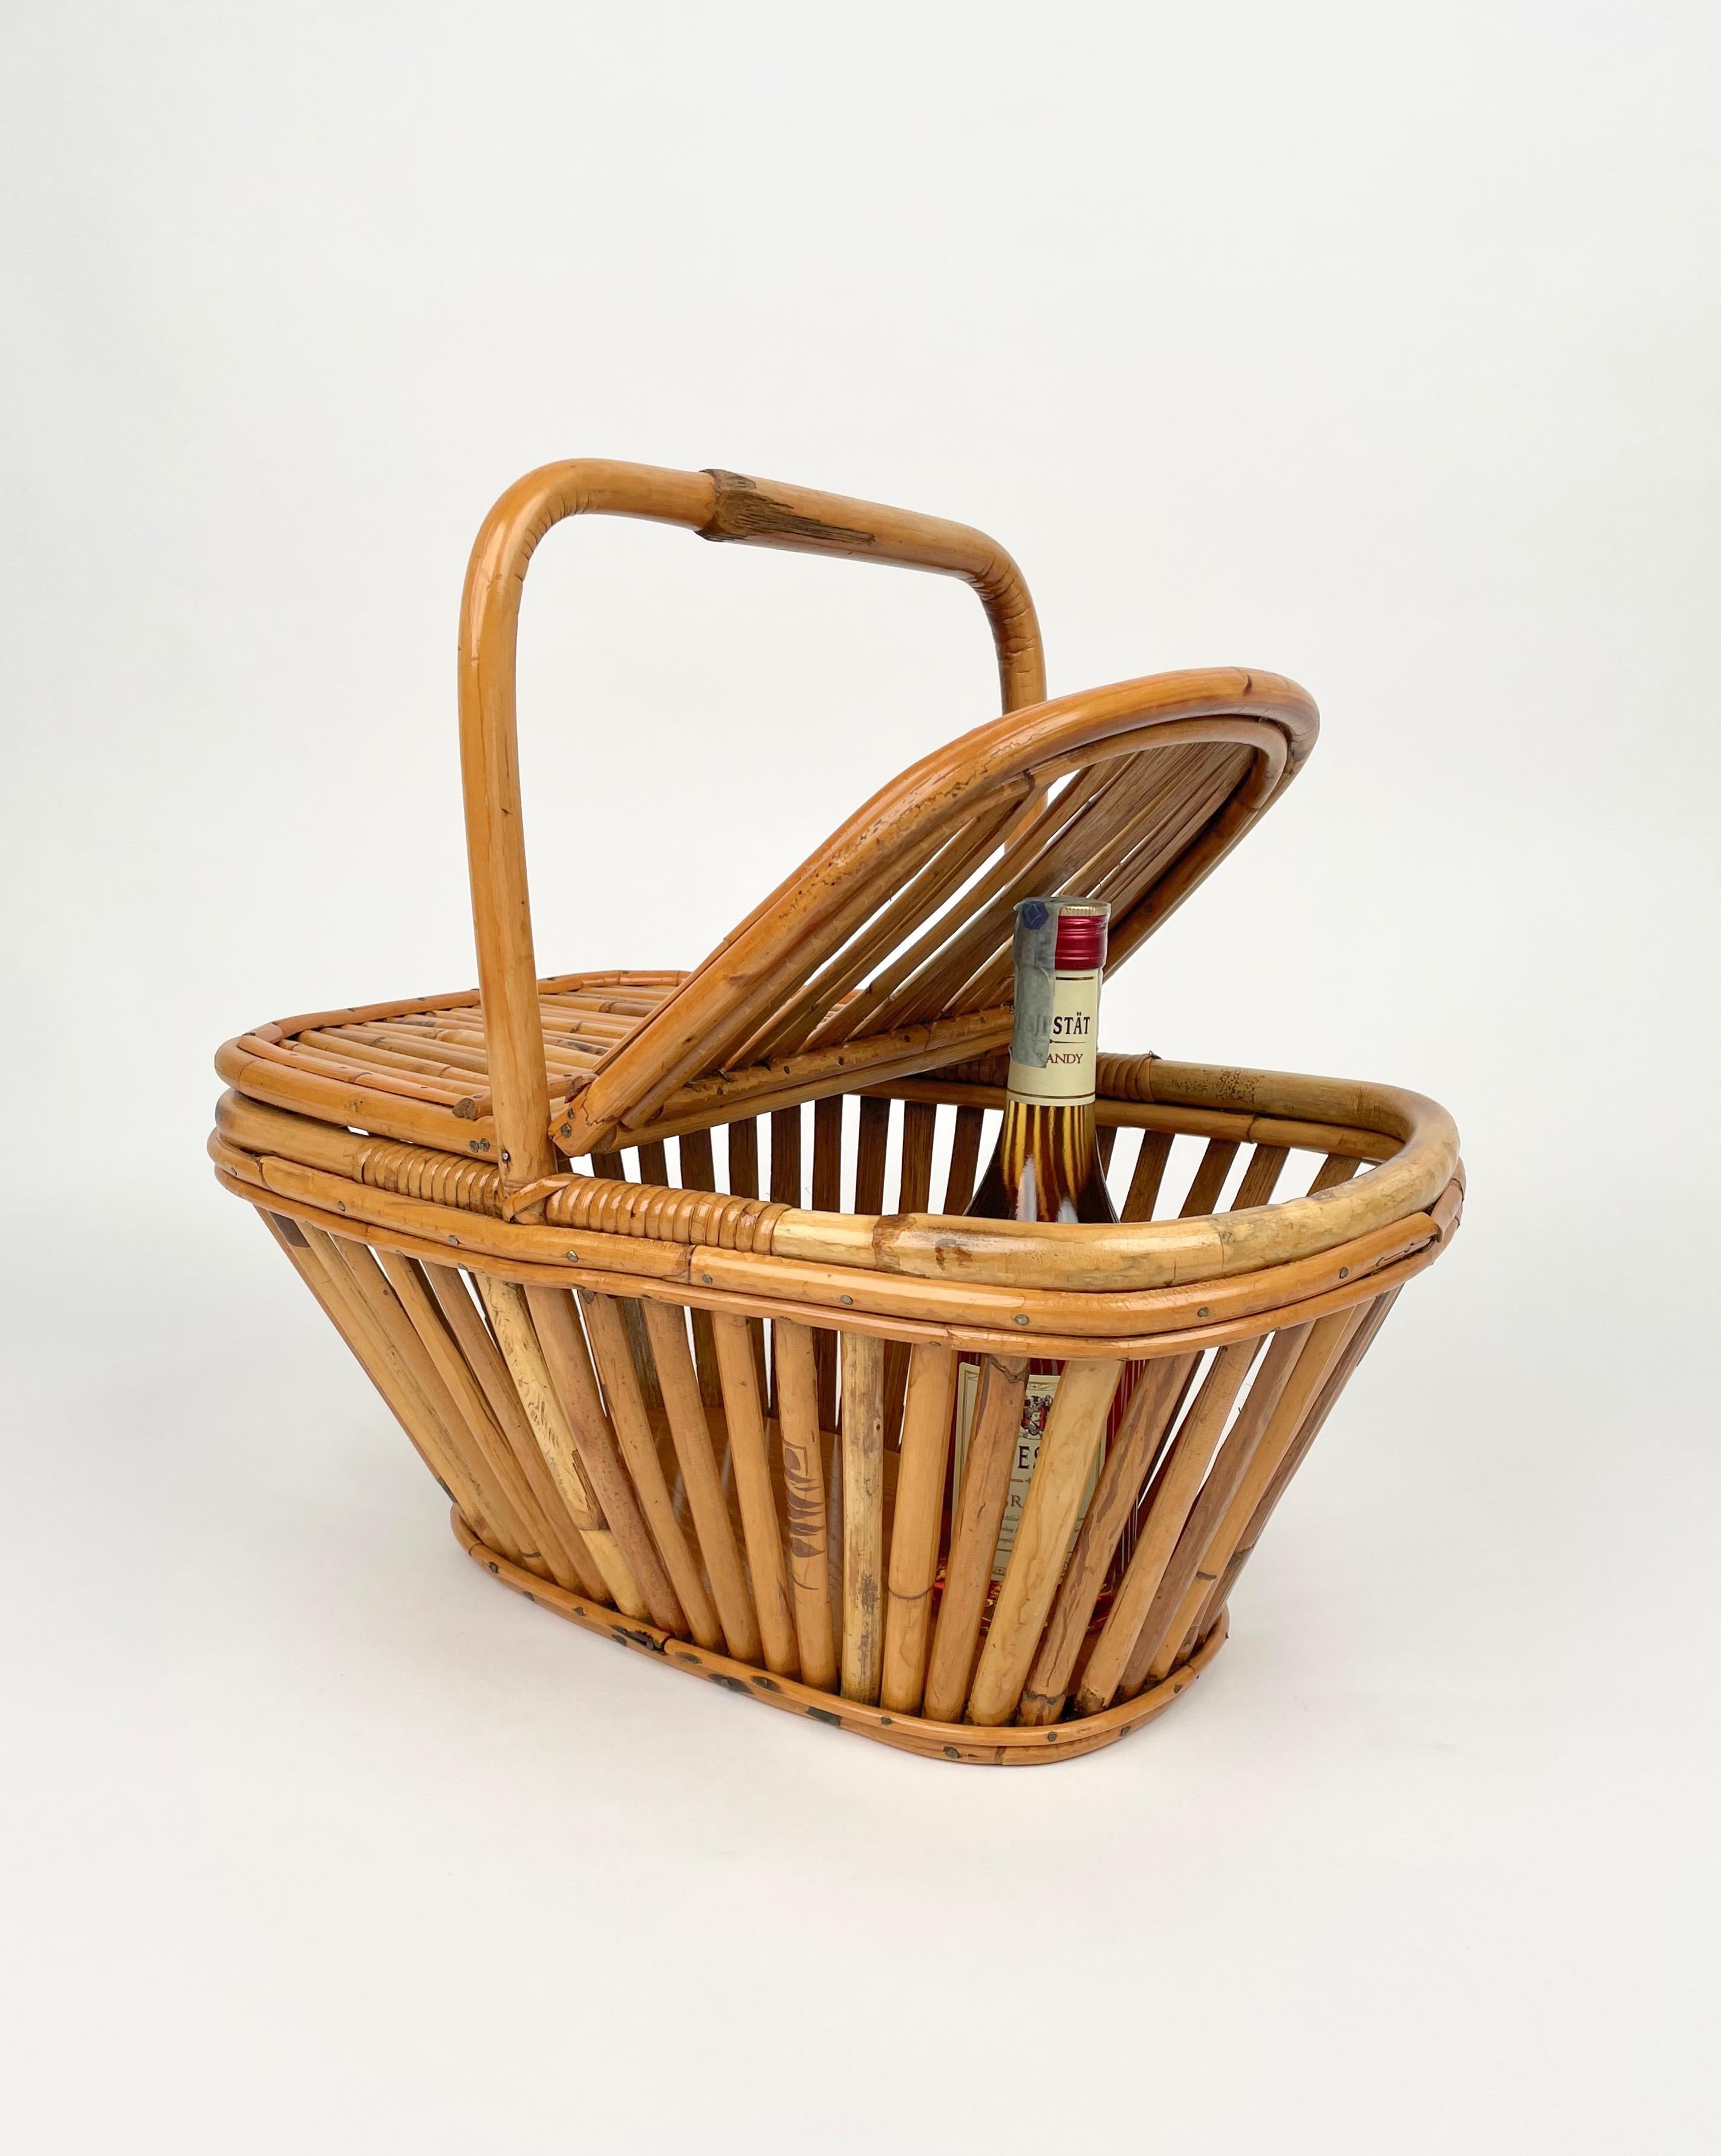 Bamboo & Rattan Picnic Basket, Italy, 1960s For Sale 2